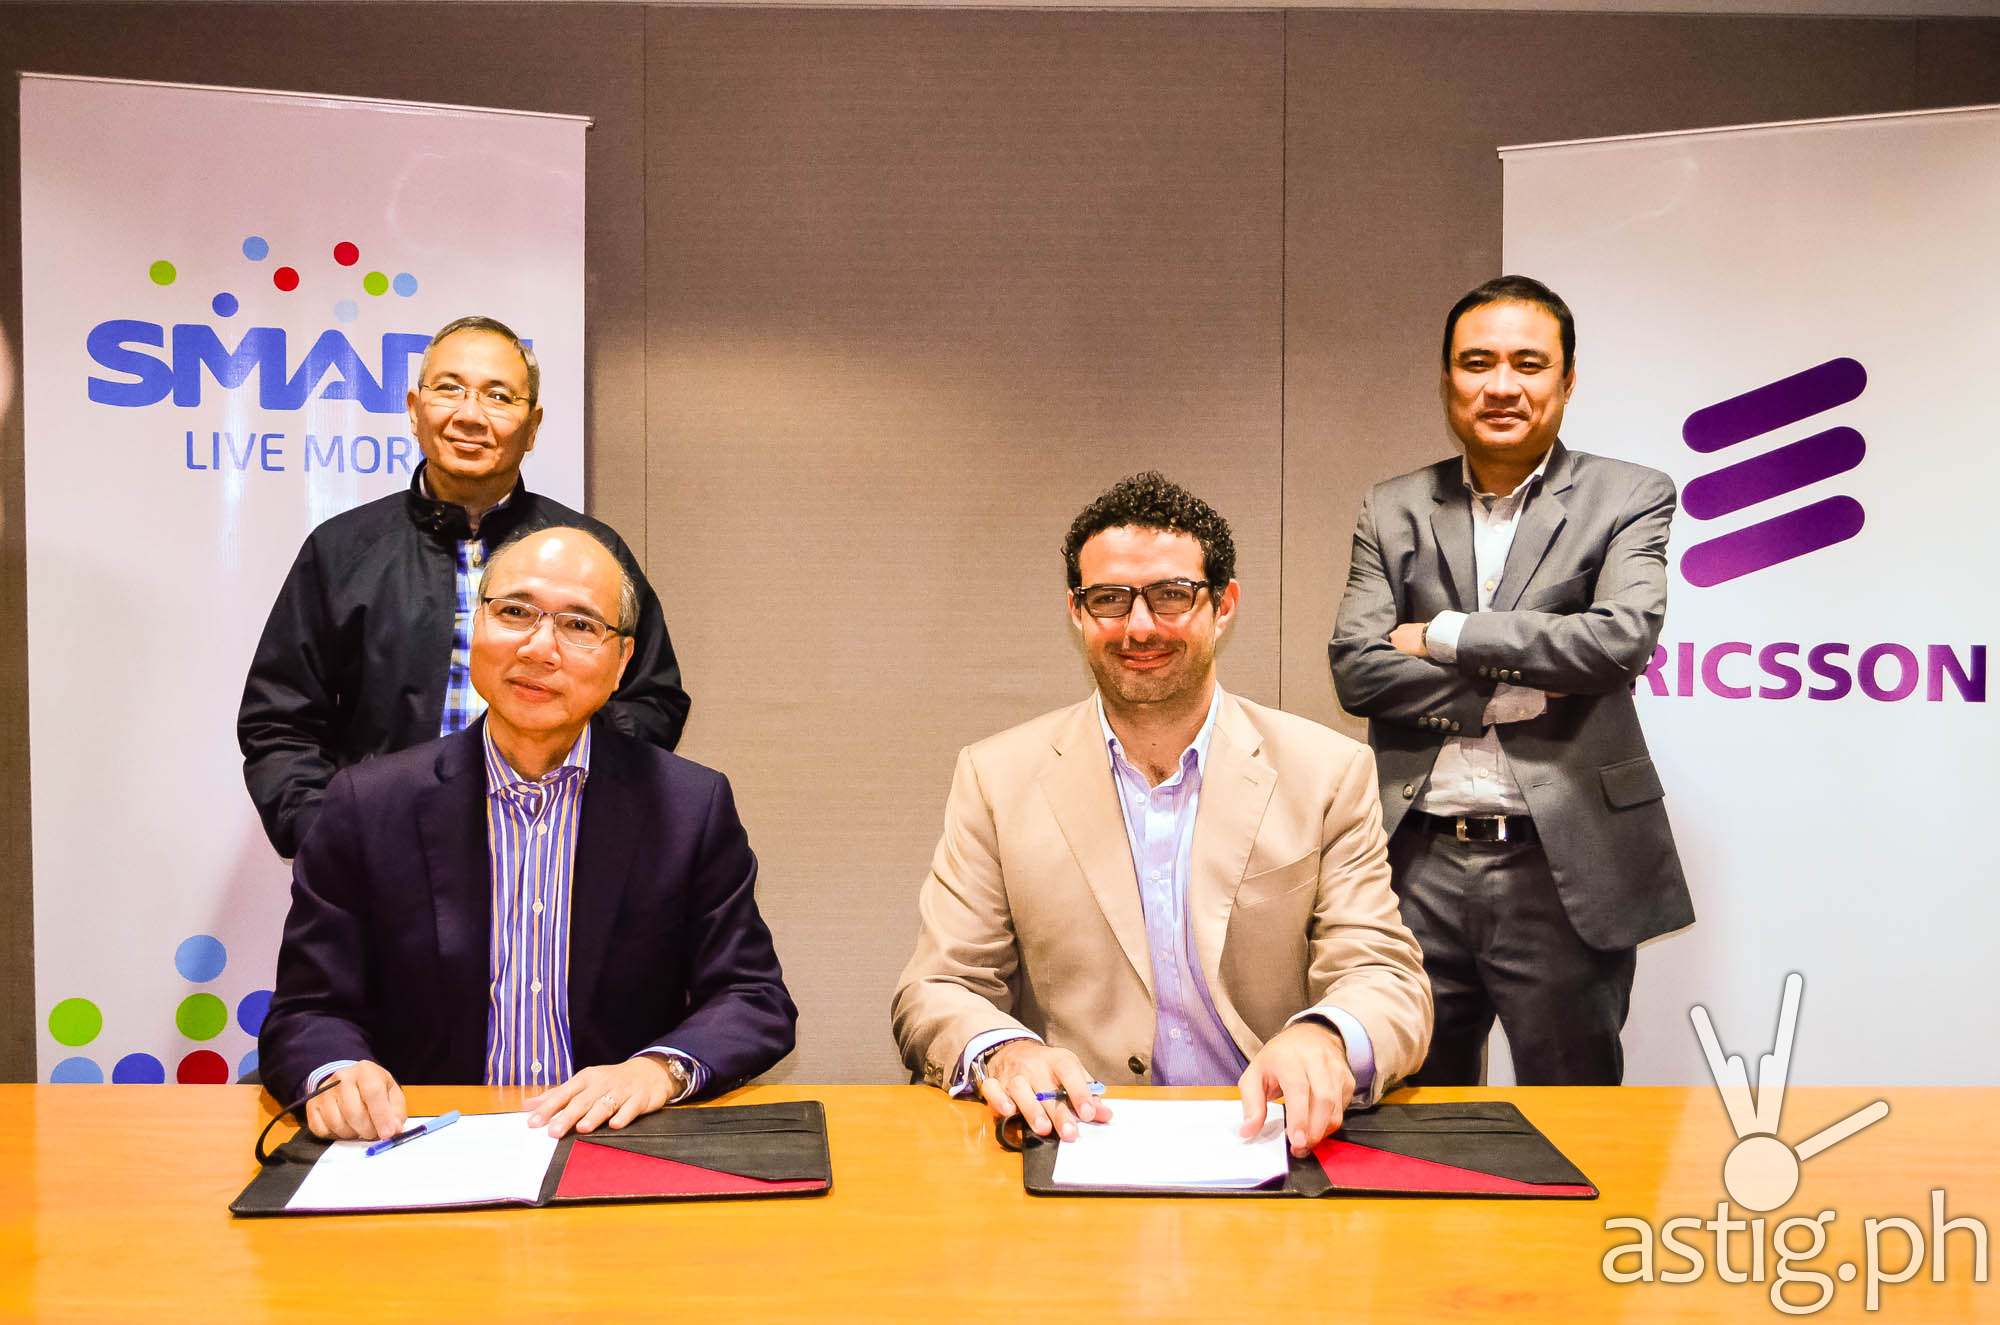 Smart, Ericsson and REFUNITE CSR partnership. Seated from left: Mr Orlando B Vea, Chief Wireless Advisor, Smart Communications and Mr Elie Hanna, Ericsson Philippines and Pacific Islands President and Country Manager. Standing from left: Mr. Ramon Isberto, Public Affairs Group Head, PLDT/ Smart Communications; and Mr Anthony Valdez, VP- Key Account Manager, Ericsson Philippines